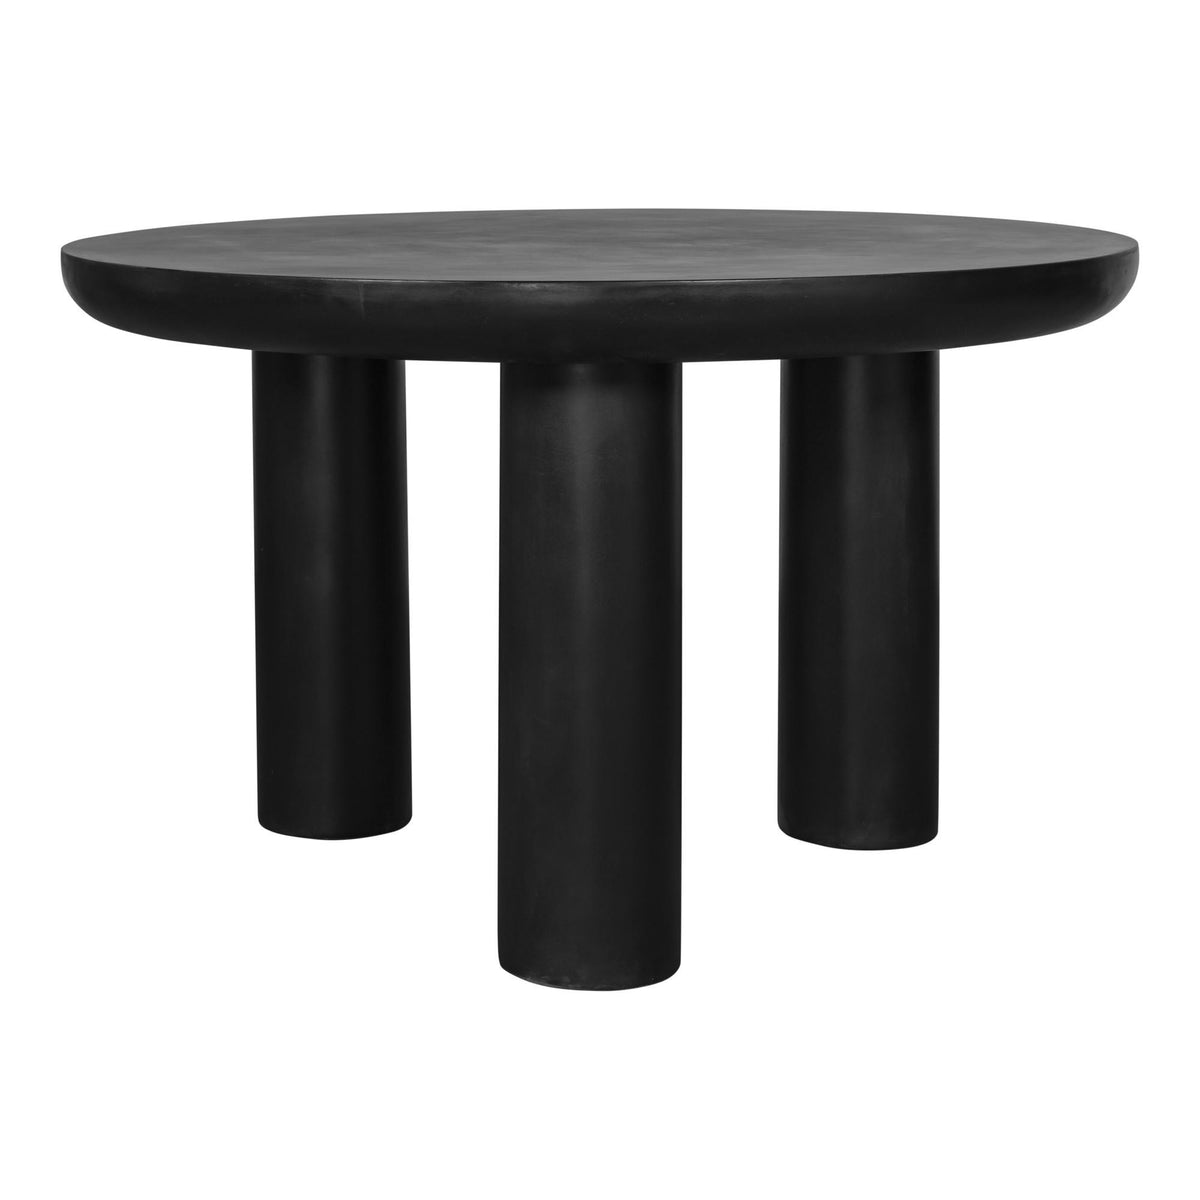 Moe's Home Collection Rocca Round Dining Table - ZT-1034-02